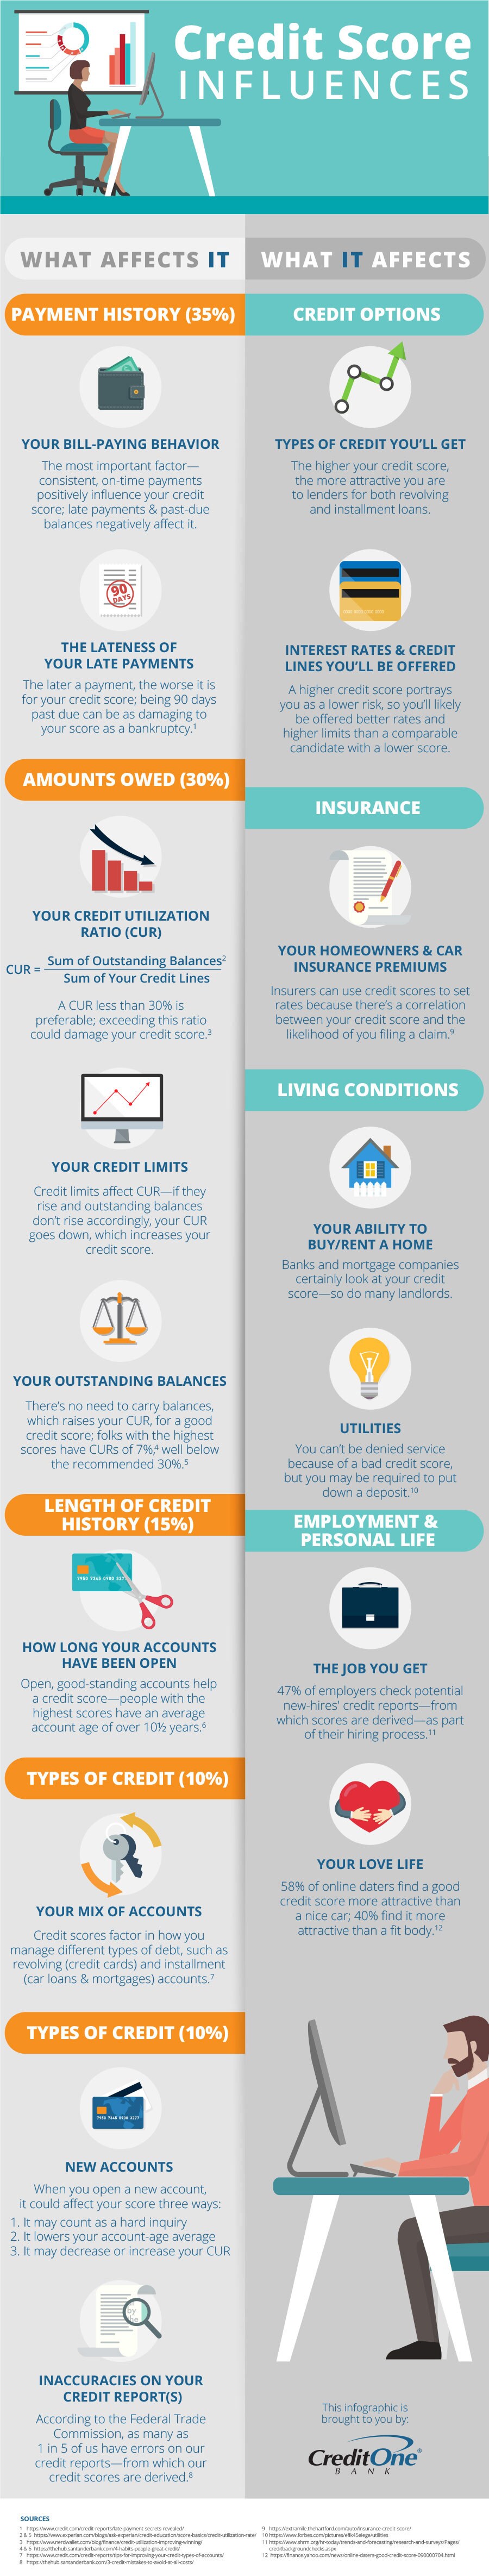 What Affects Your Credit Score & What It Affects [Infographic]